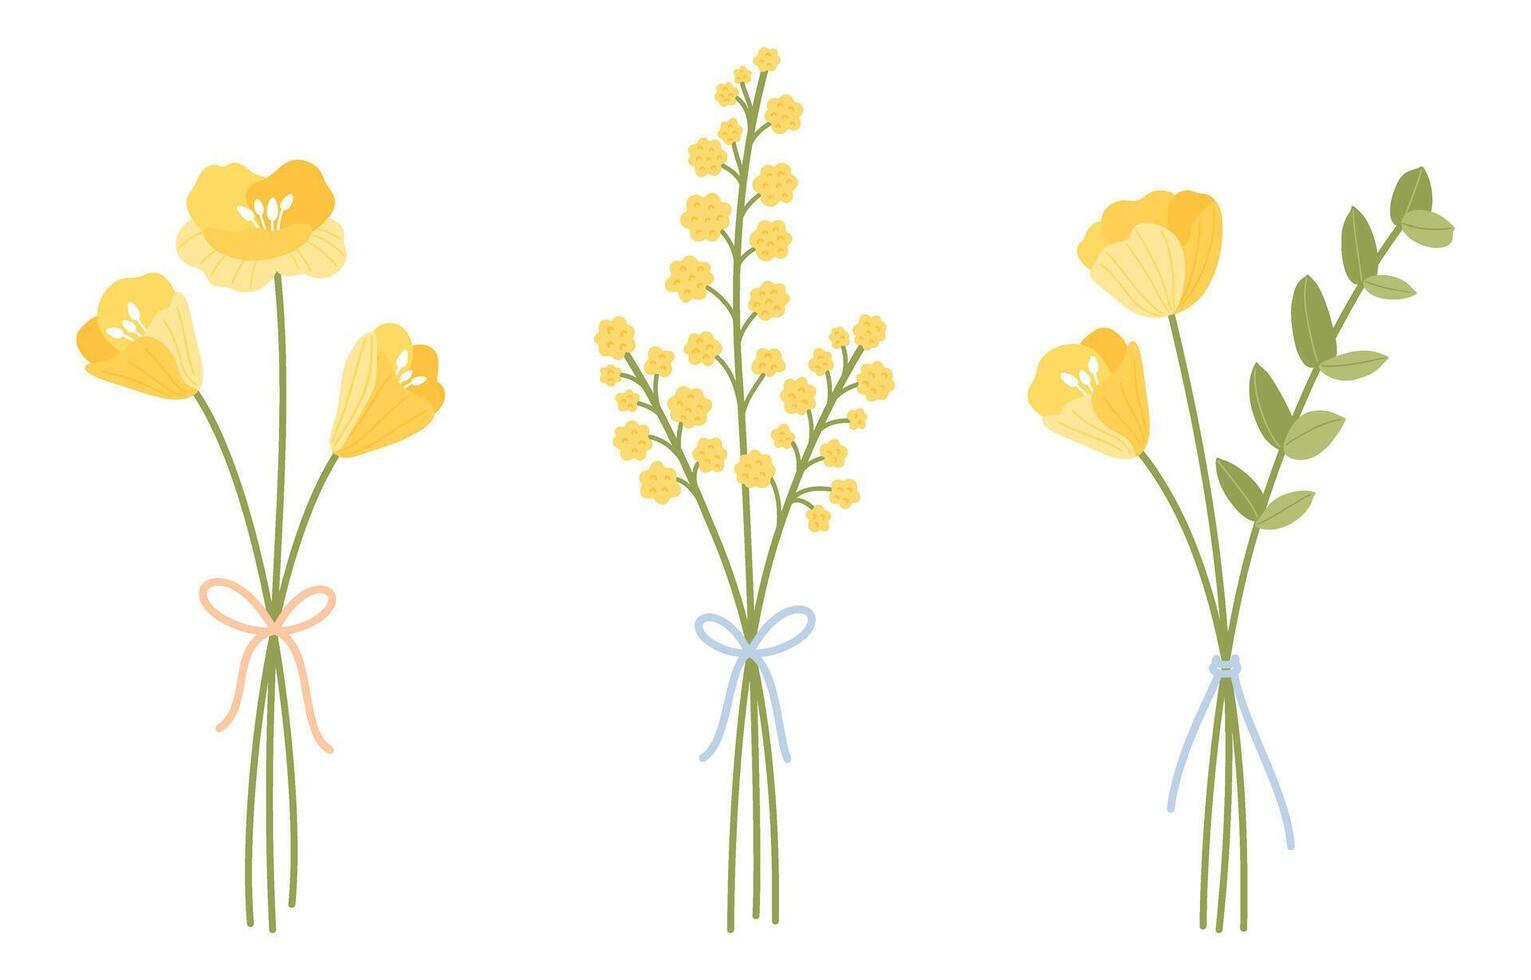 Wildflower bouquets, tied with ribbon. Set of floral vector illustrations. Gentle flowers, meadow herbs, and wild plants for design projects